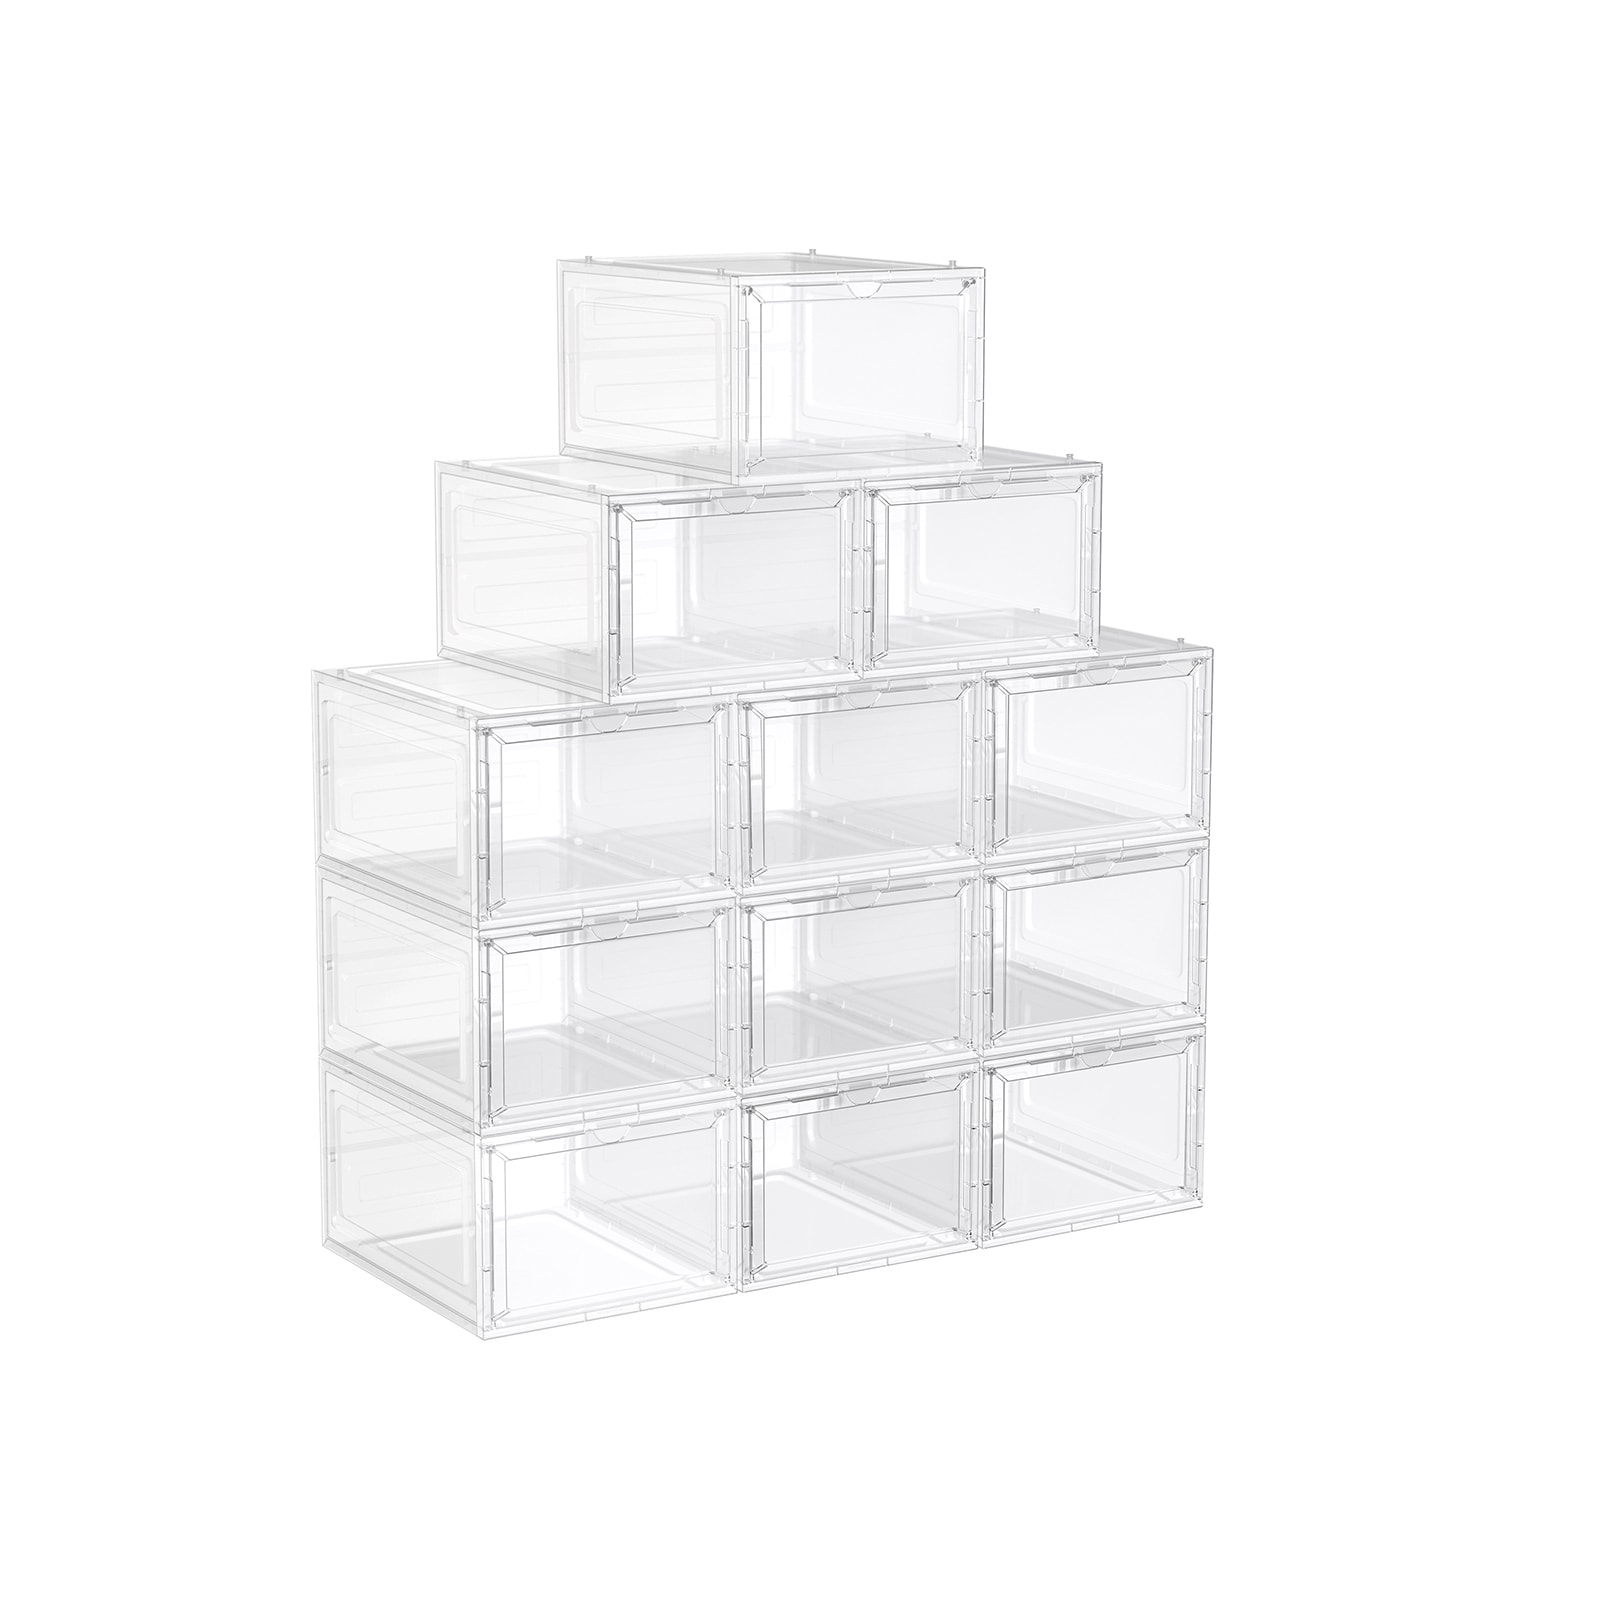 https://ak1.ostkcdn.com/images/products/is/images/direct/f5bd317c5dbe8e7afc289a08b43c79827f6cc784/White-Shoe-Boxes-Set-of-12.jpg